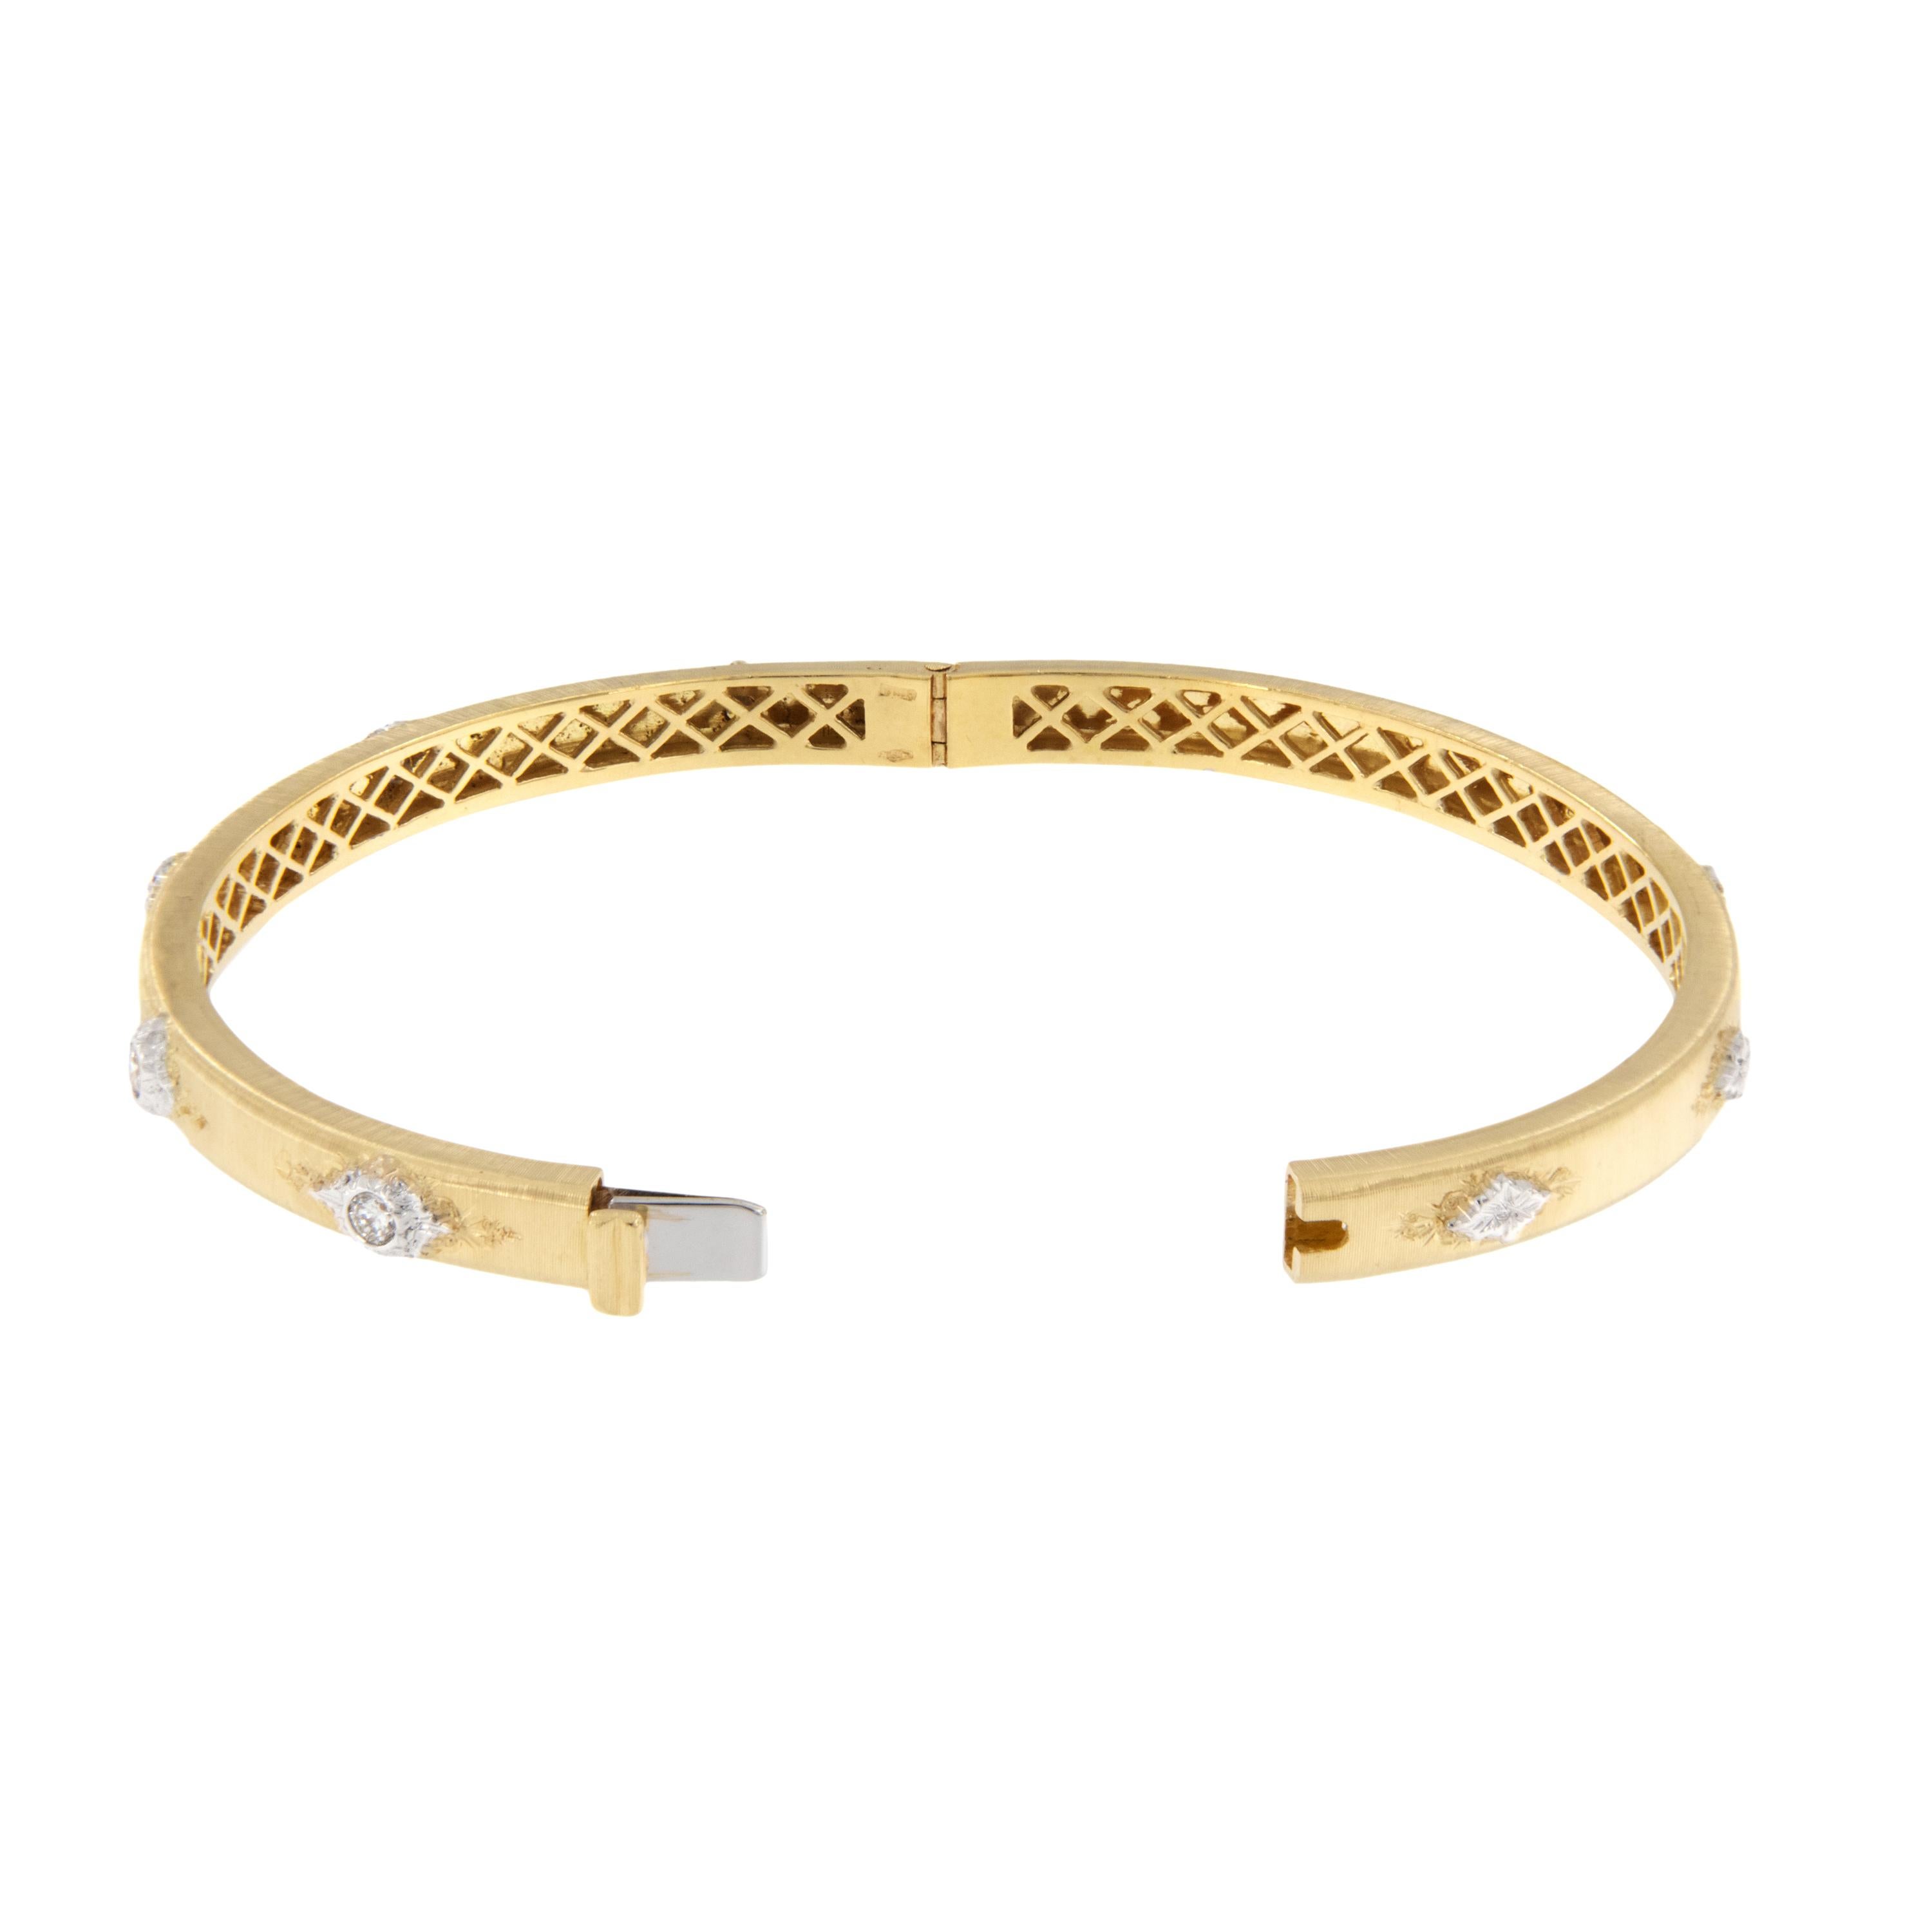 Made in Italy 18 Karat Yellow Gold Florentine Finish Diamond Bangle Bracelet In New Condition For Sale In Troy, MI